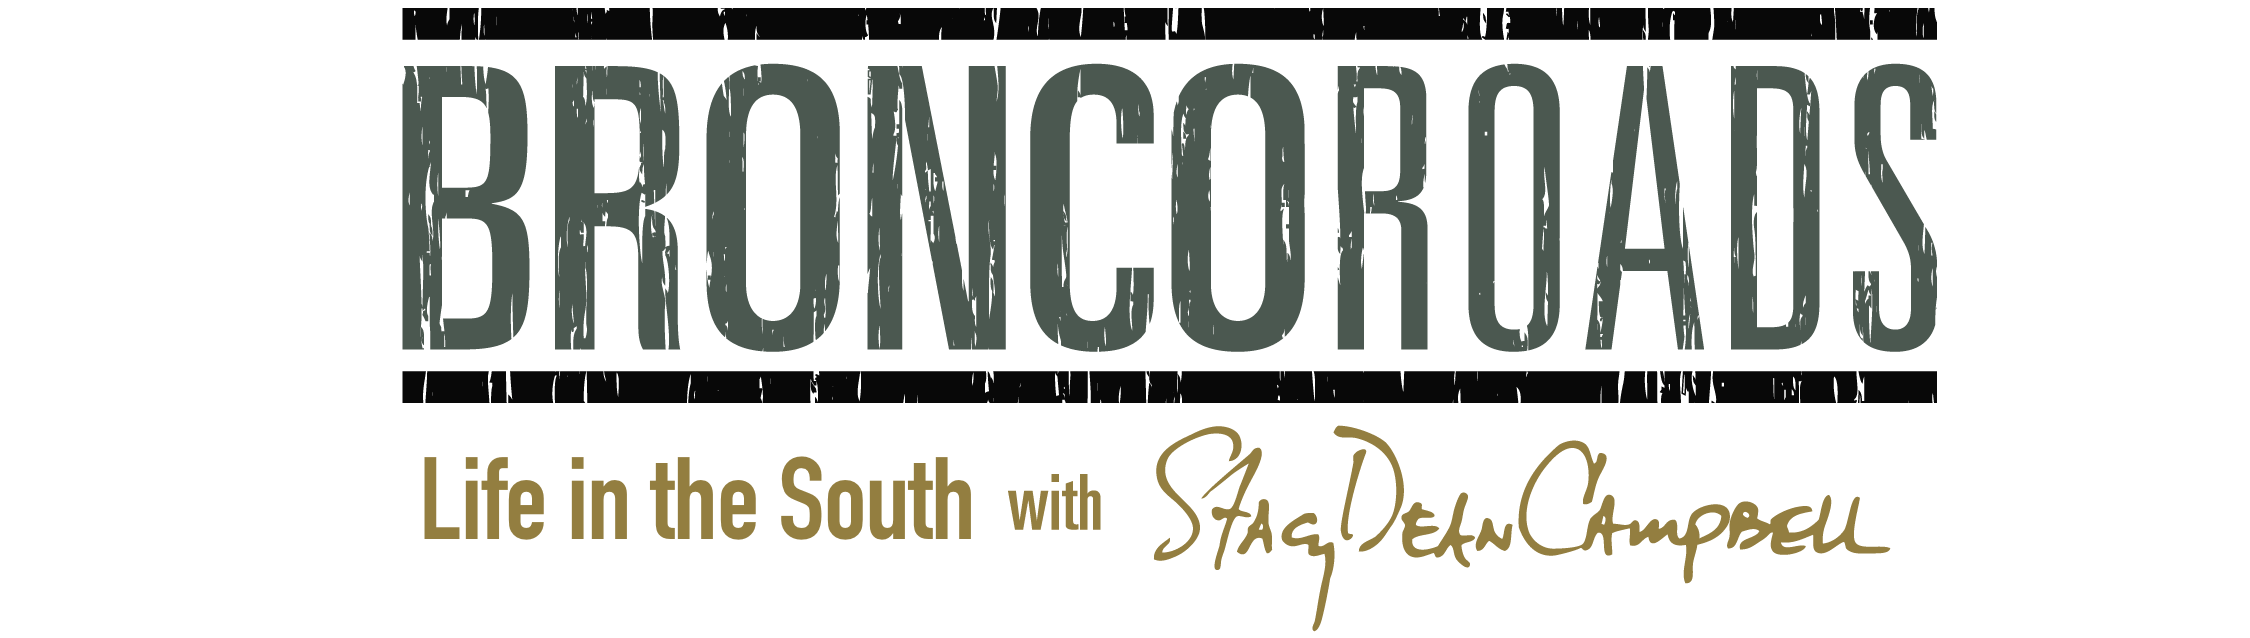 Bronco Roads - Life in the South with Stacy Dean Campbell